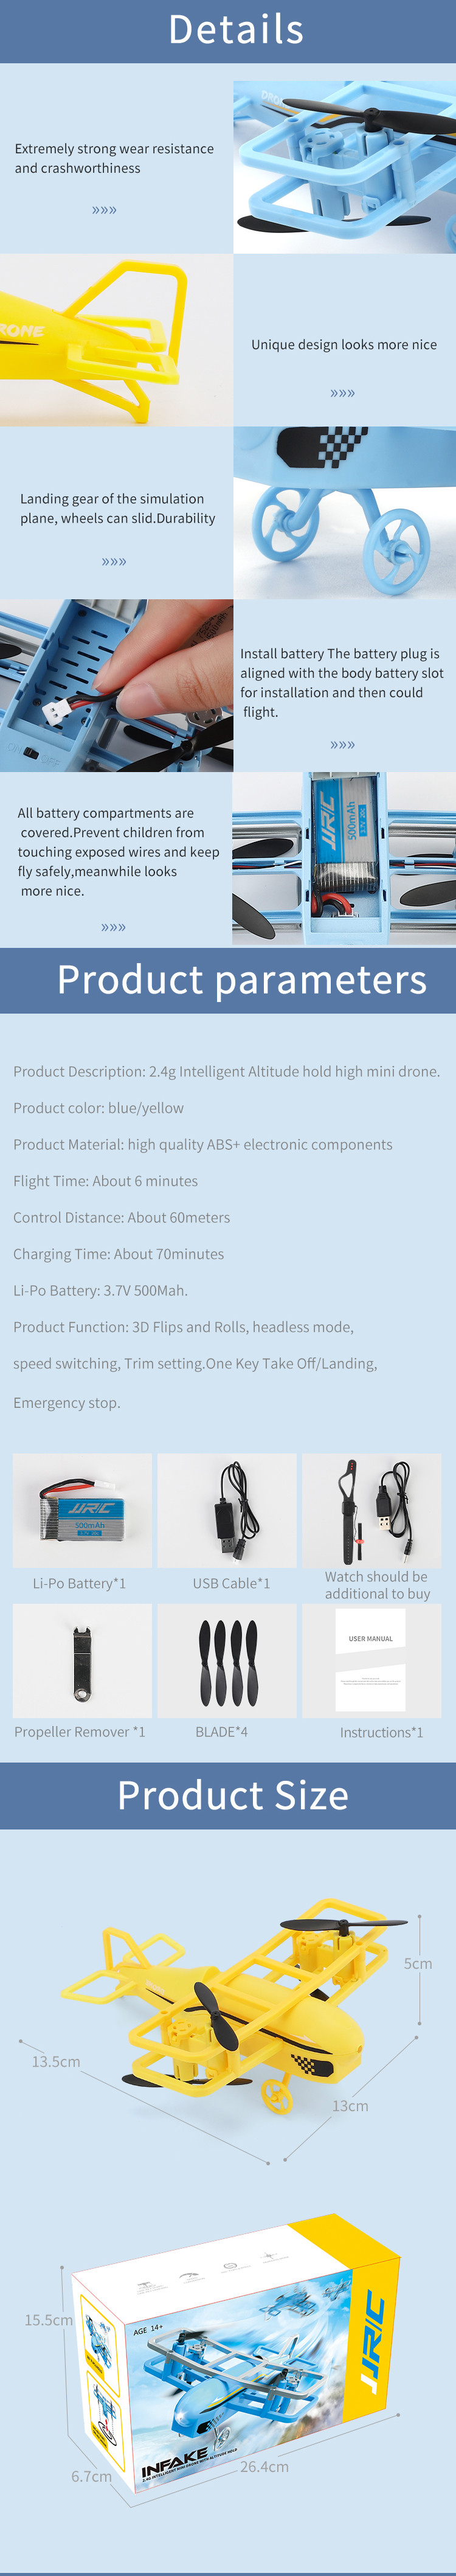 JJRC-H95-24G-Intelligent-Altitude-Hold-RC-Mini-Helicopters-Toys-360deg-FlipRoll-RC-Quadcopter-Drone-1713406-3